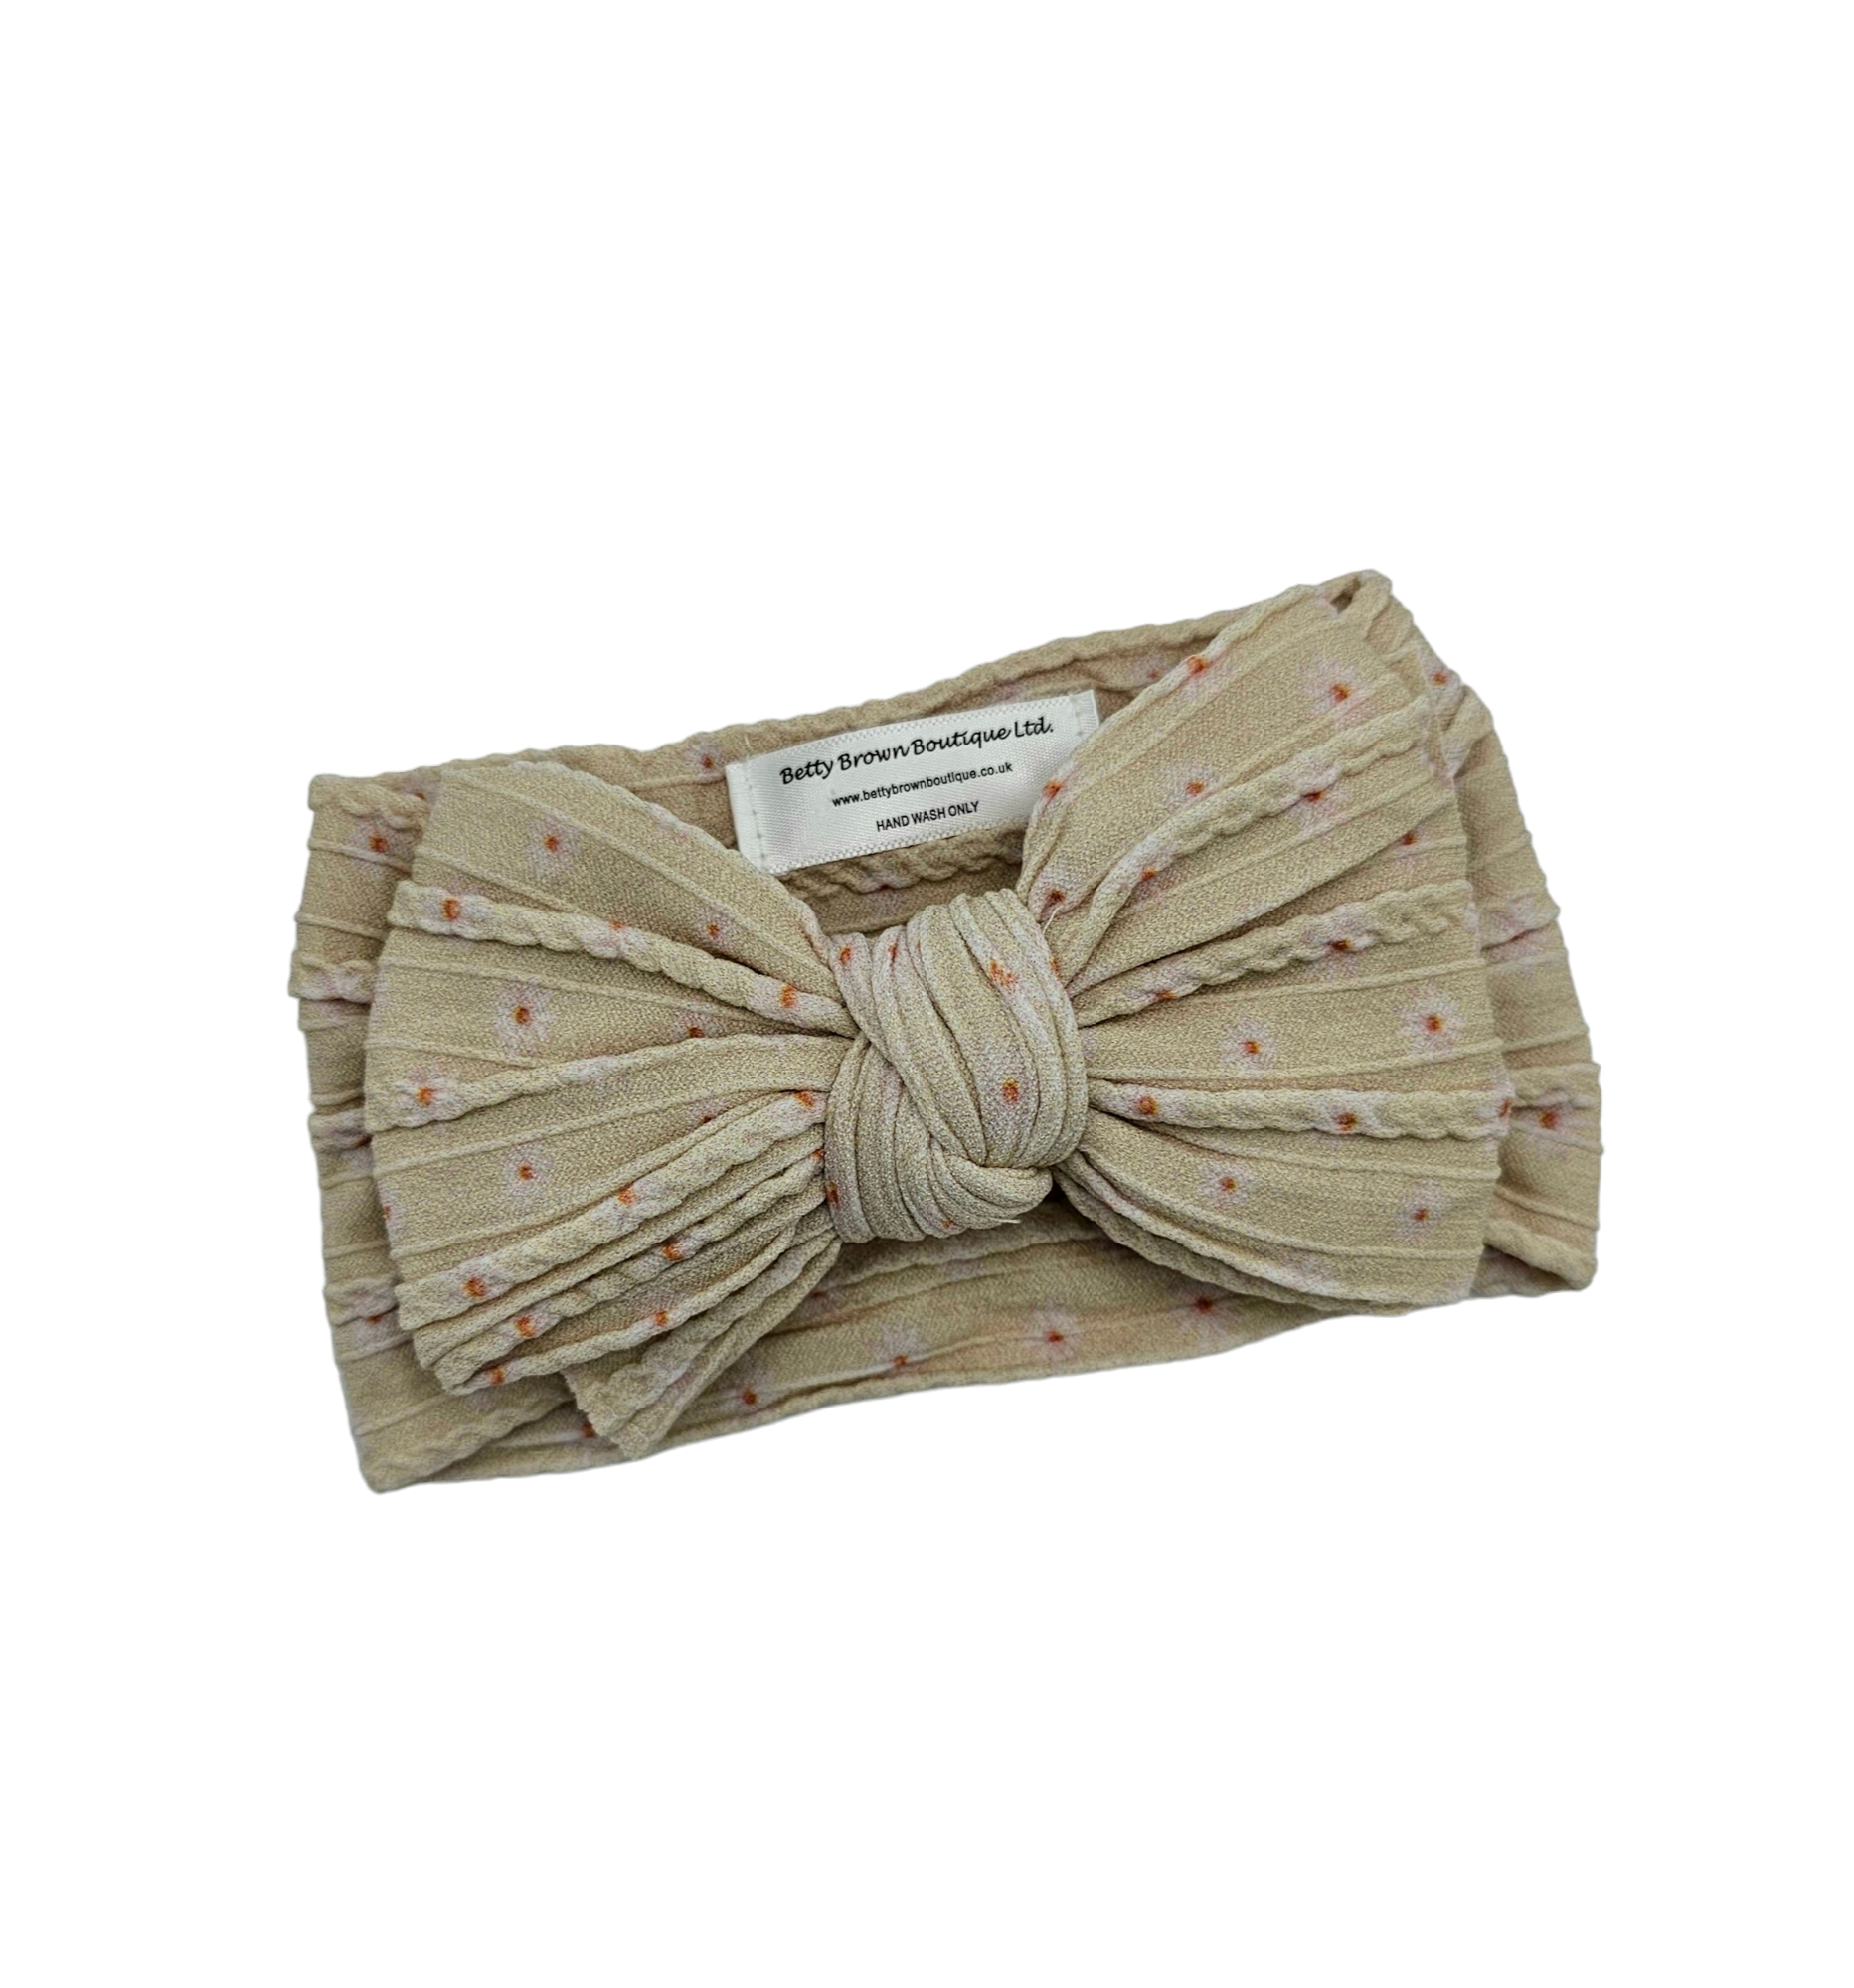 Sand Daisy Larger Bow Cable Knit Headwrap - Betty Brown Boutique Ltd